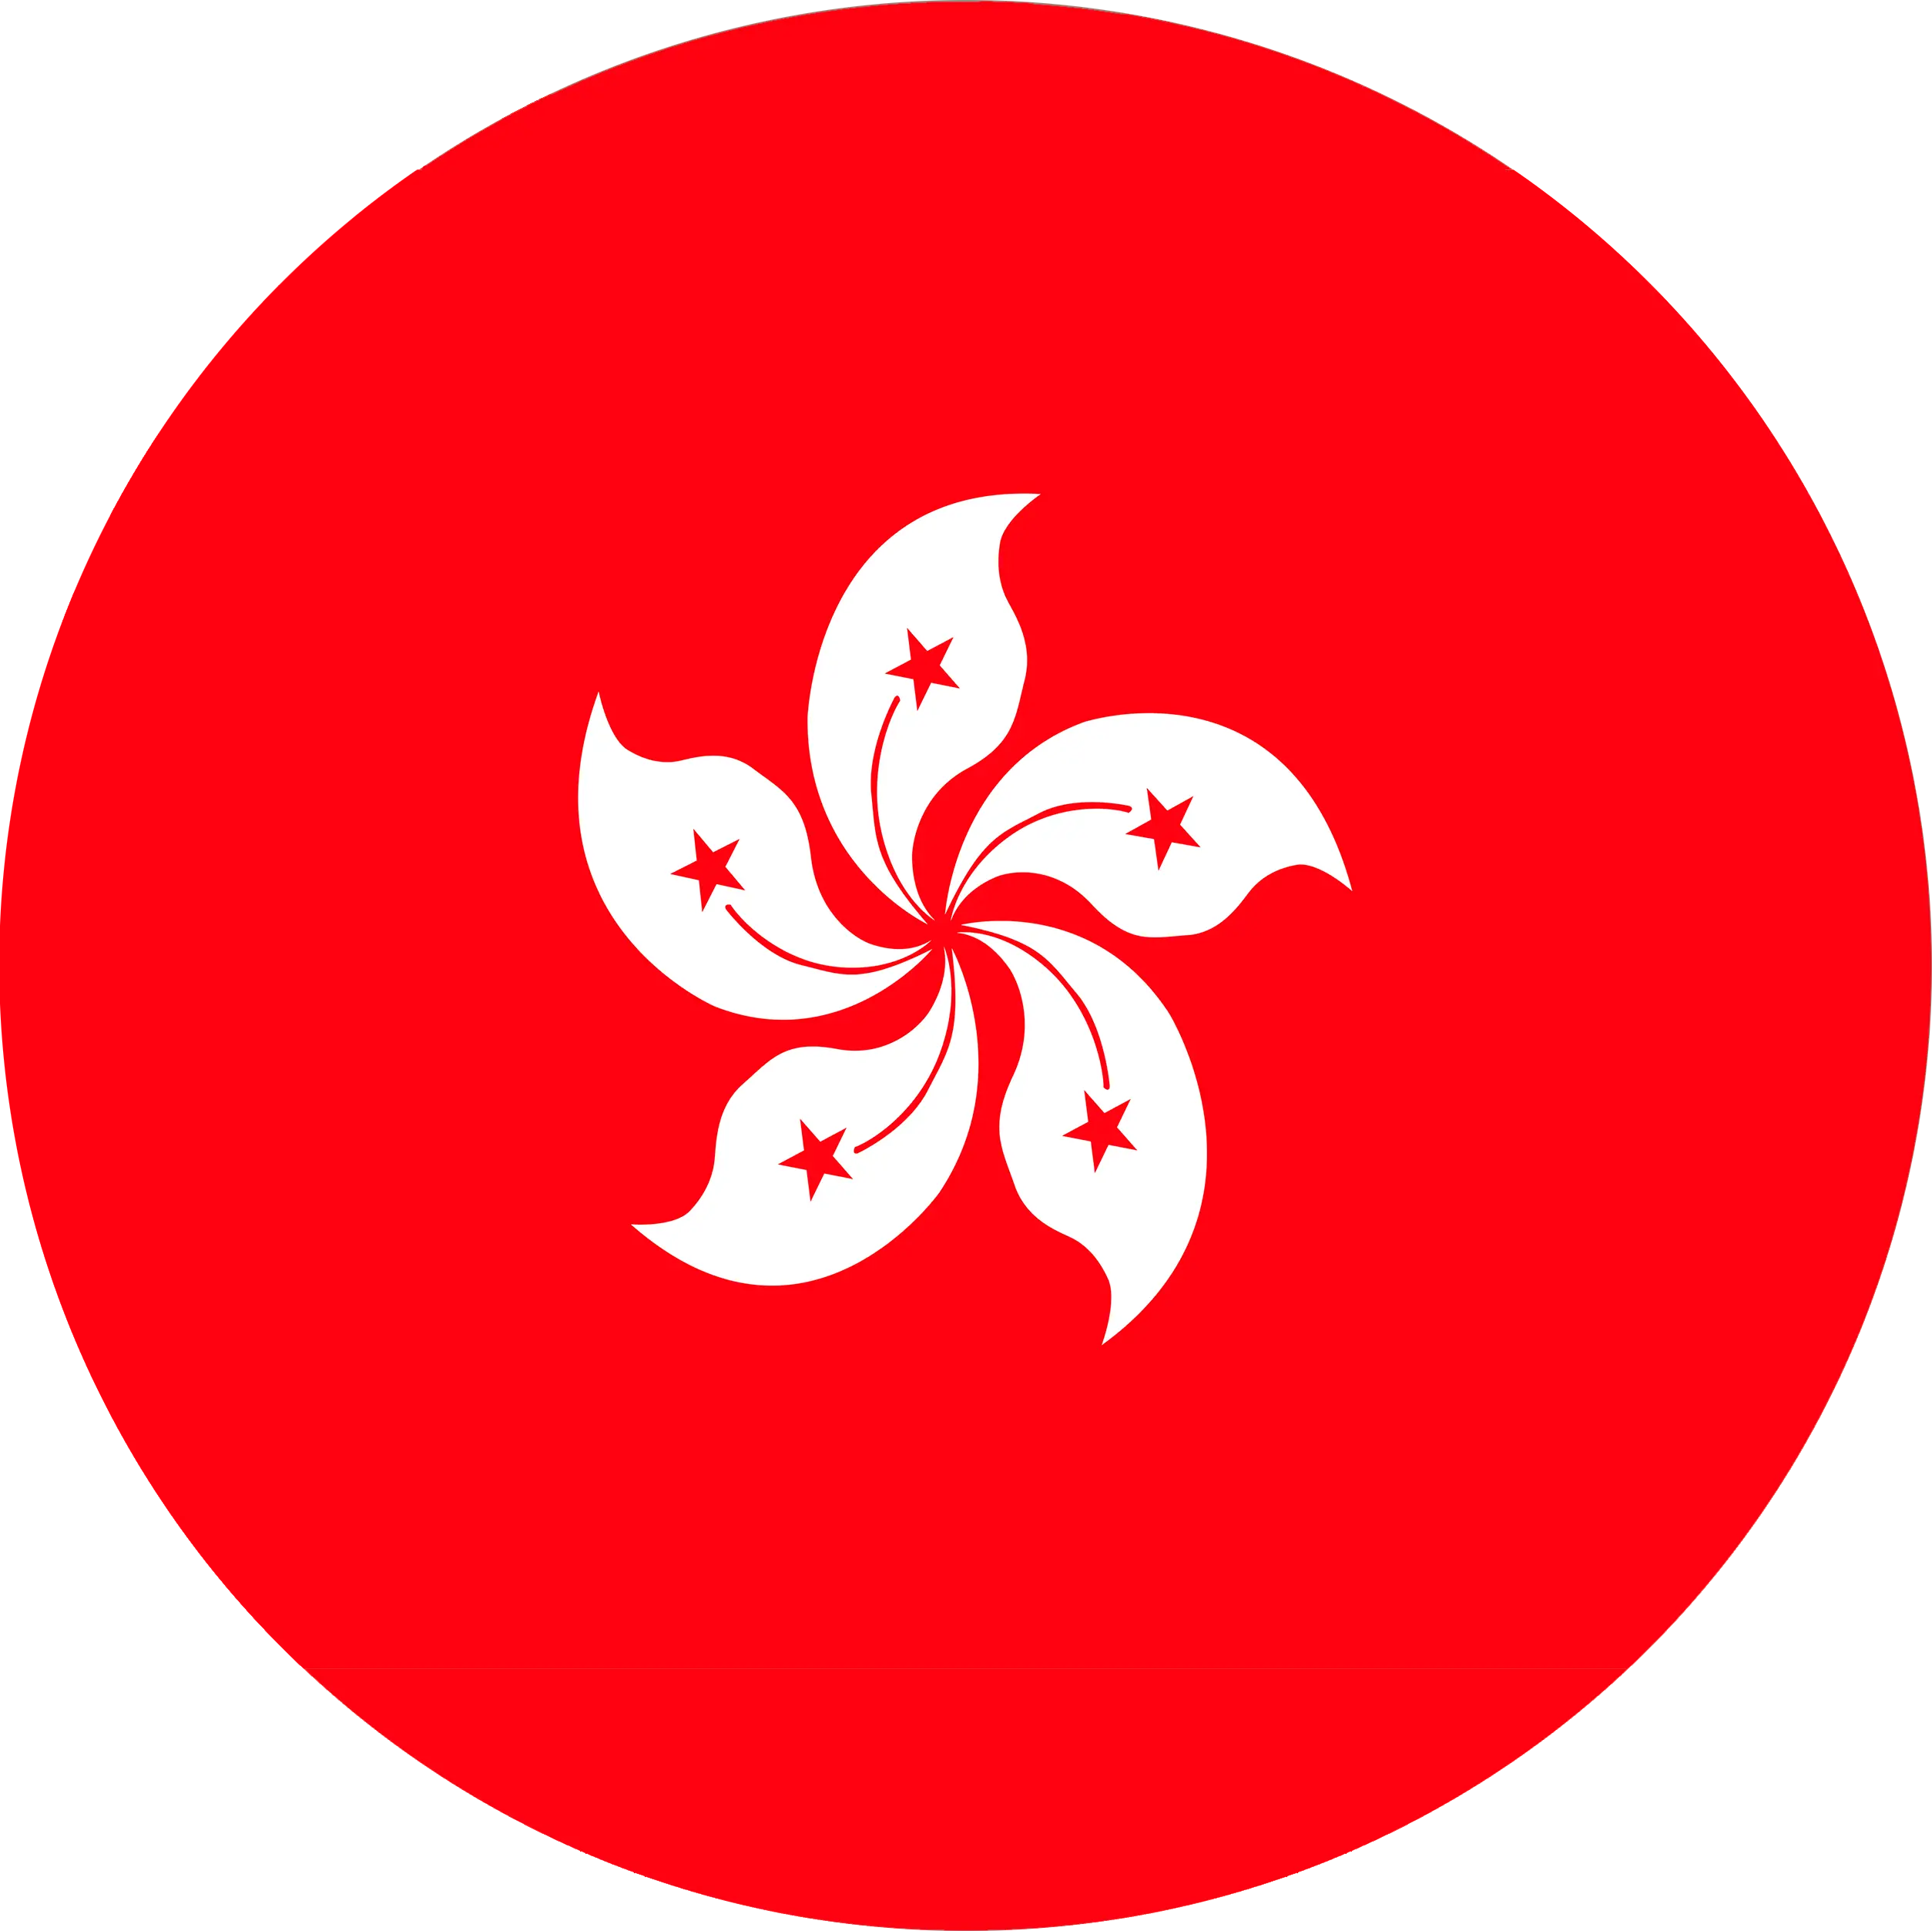 Country flag of HKD